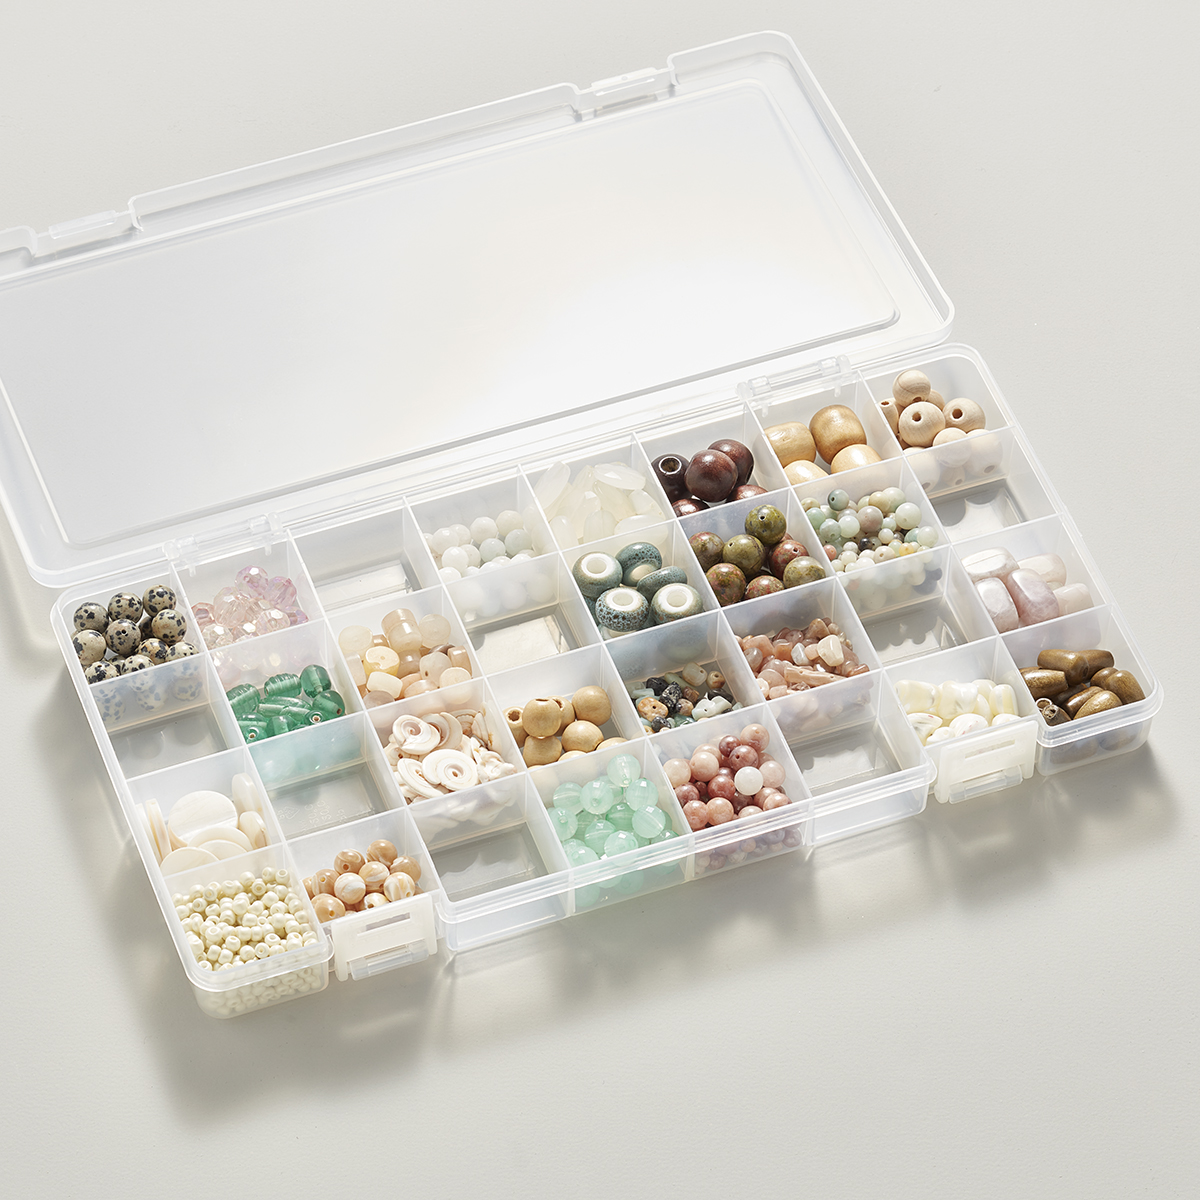 Large Compartment Boxes | The Container Store